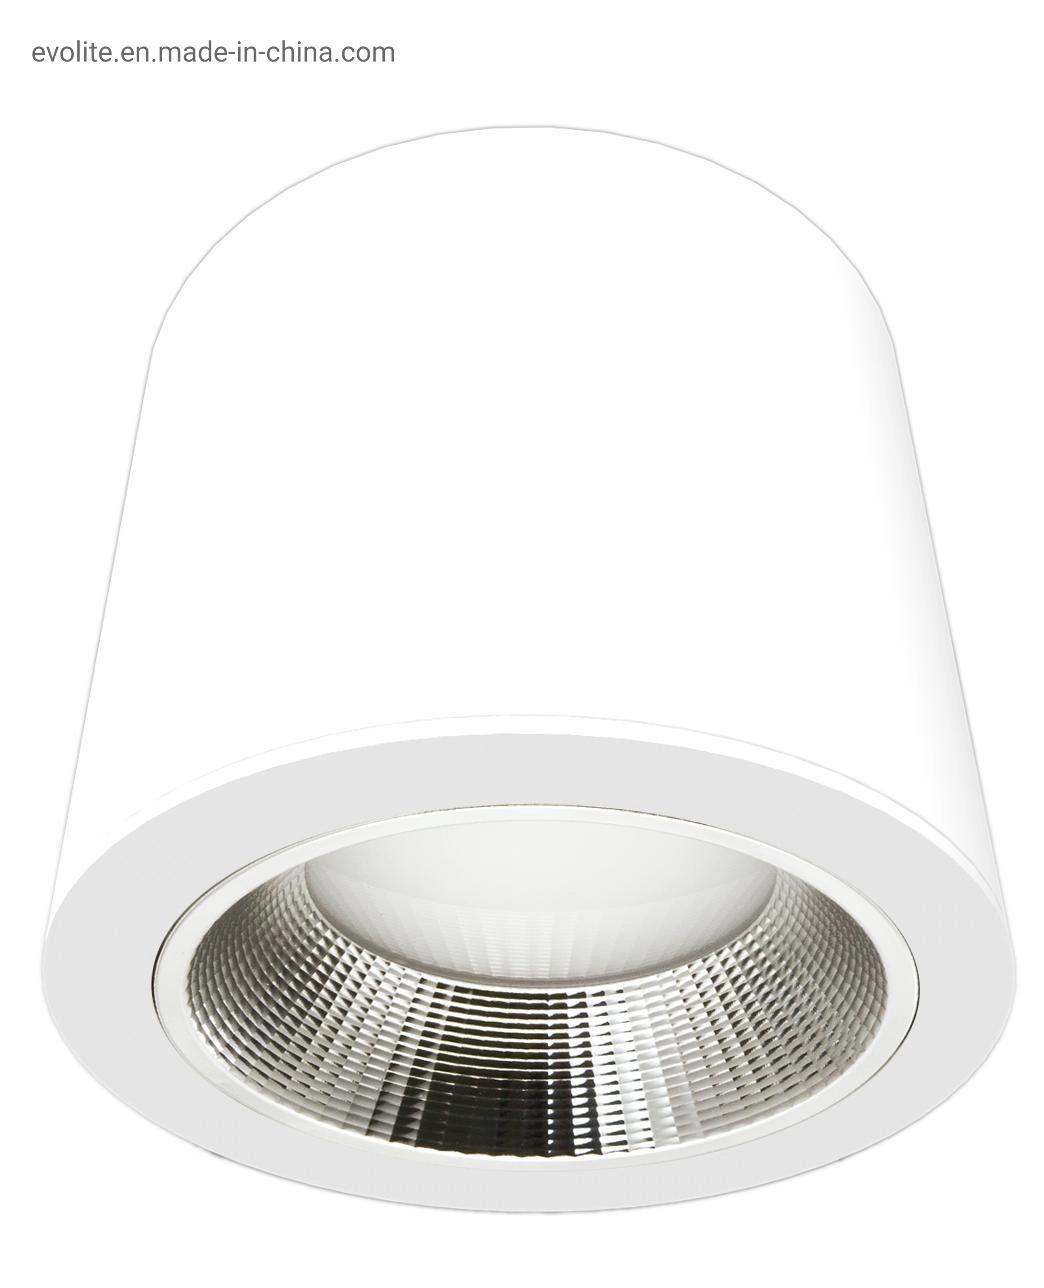 Dimmable Retrofit Recessed Downlight Cool White 35W LED Ceiling Down Light for Shopping Mall